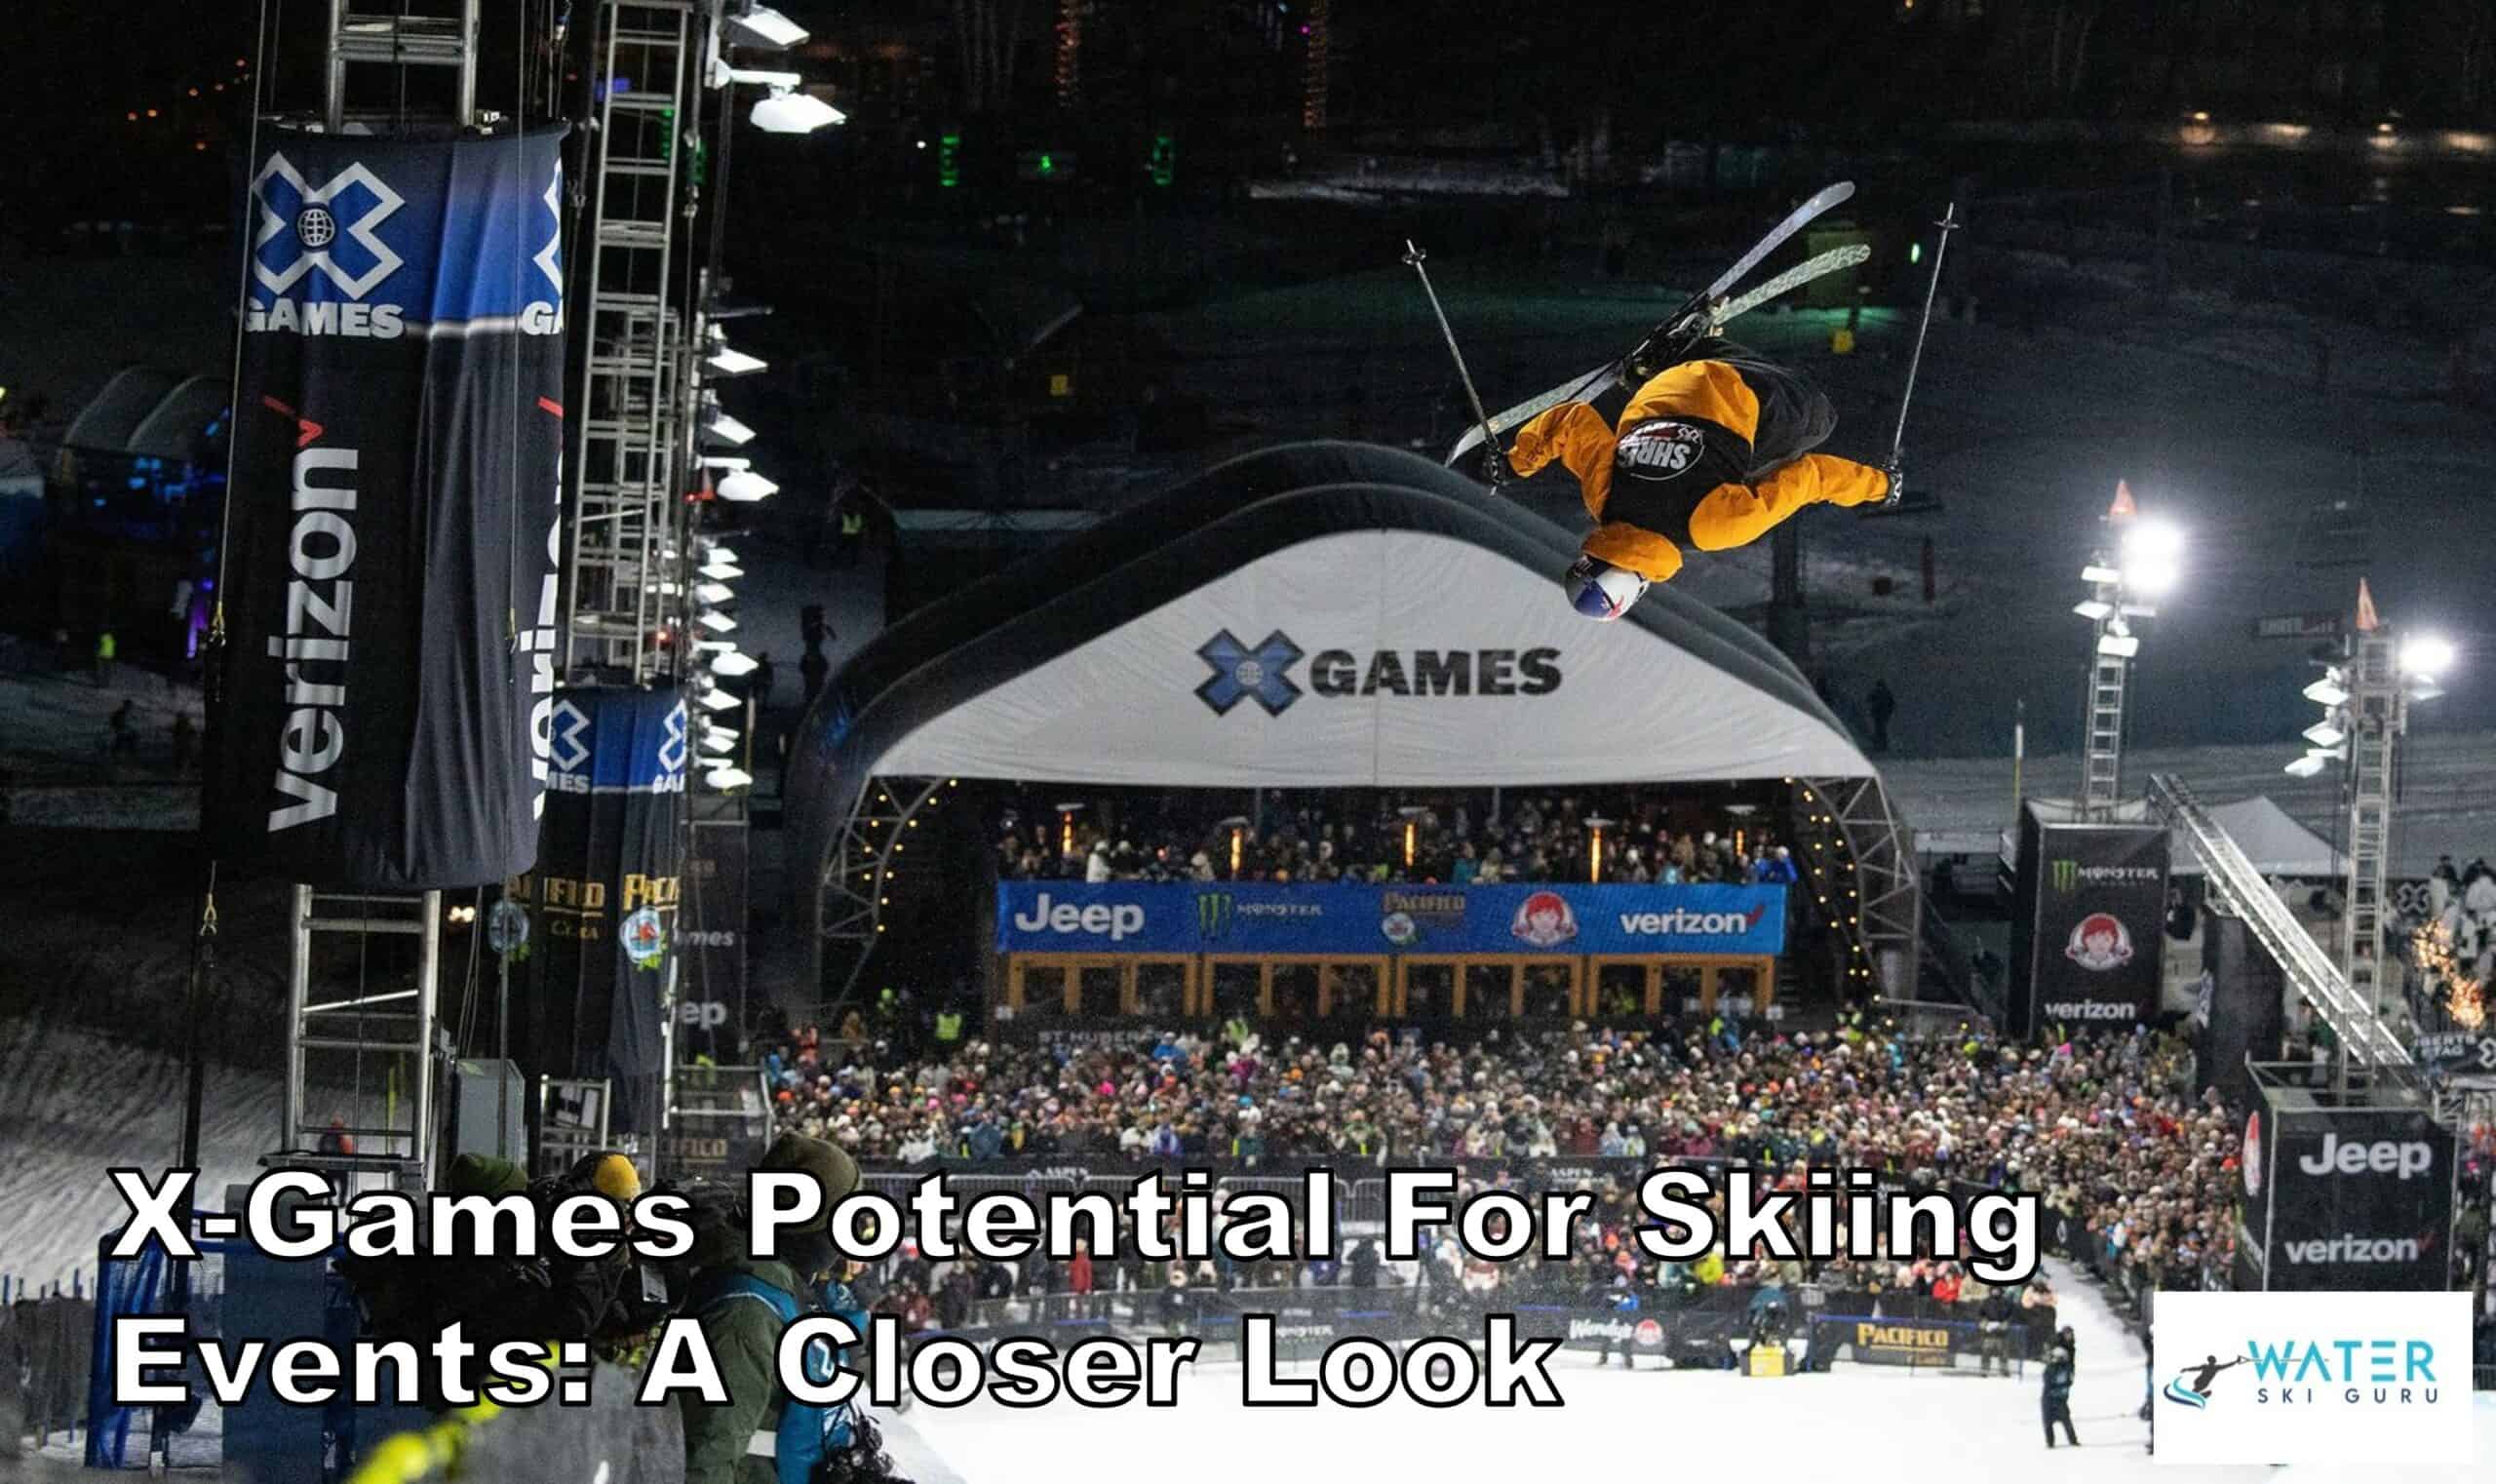 X-Games Potential For Skiing Events: A Closer Look